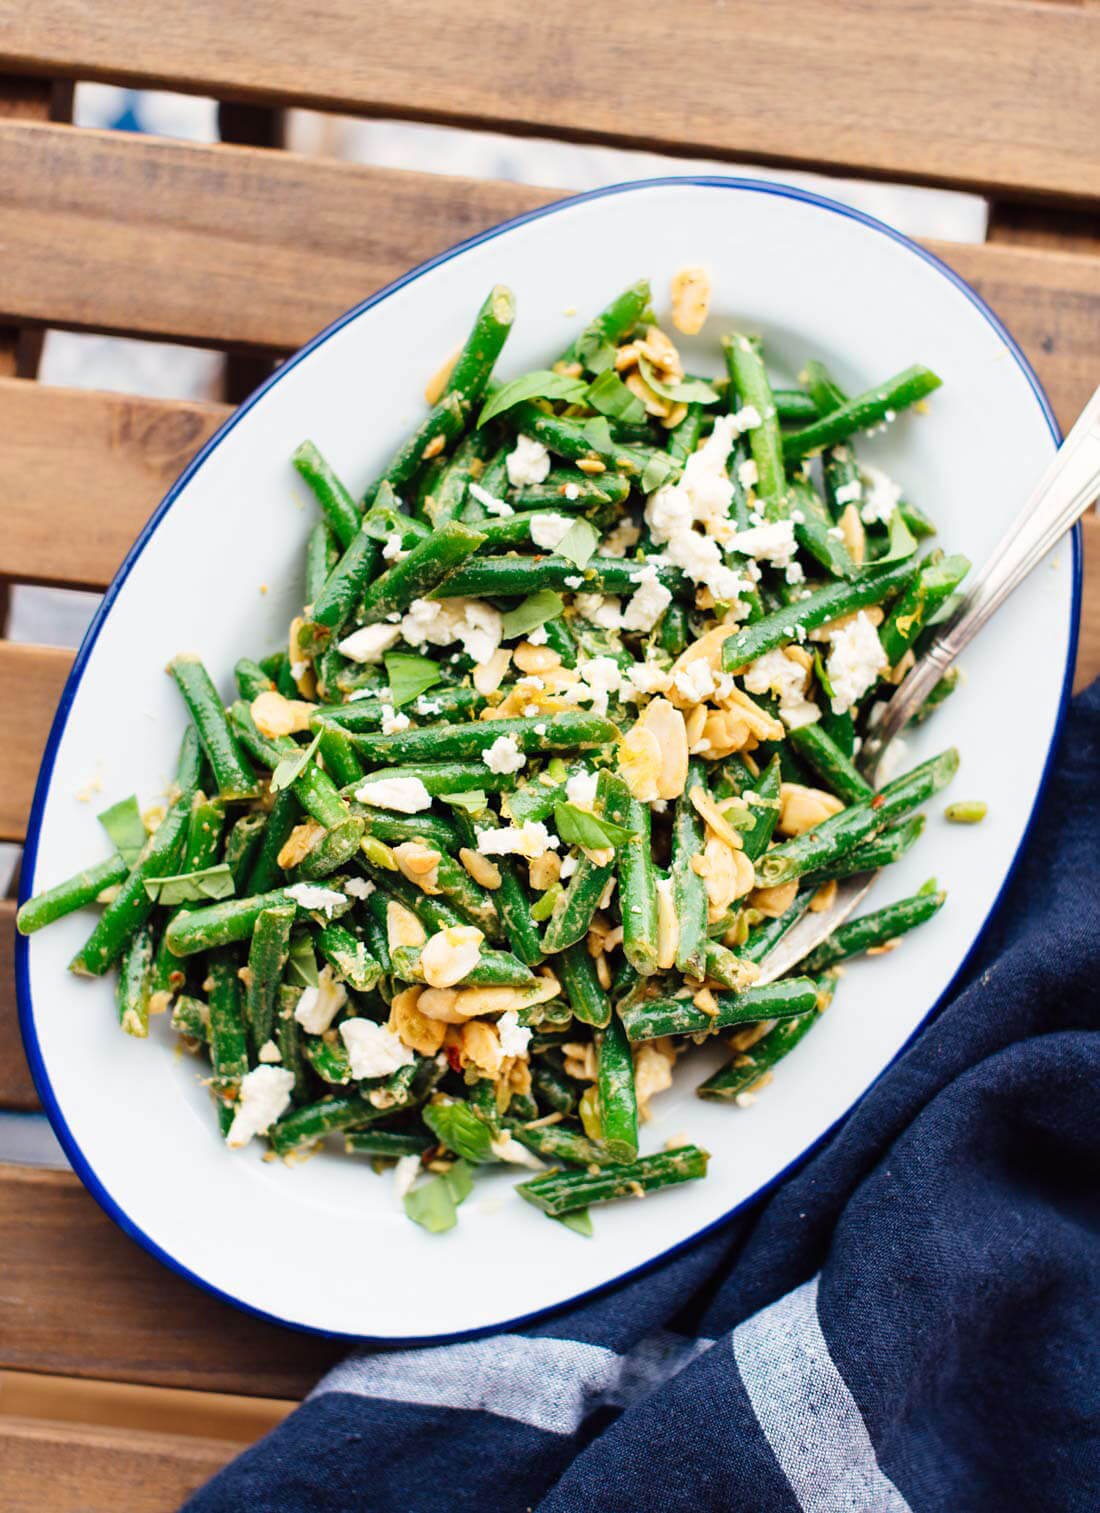 This green bean salad recipe is epic! Learn the best way to cook green beans, and get the recipe at cookieandkate.com